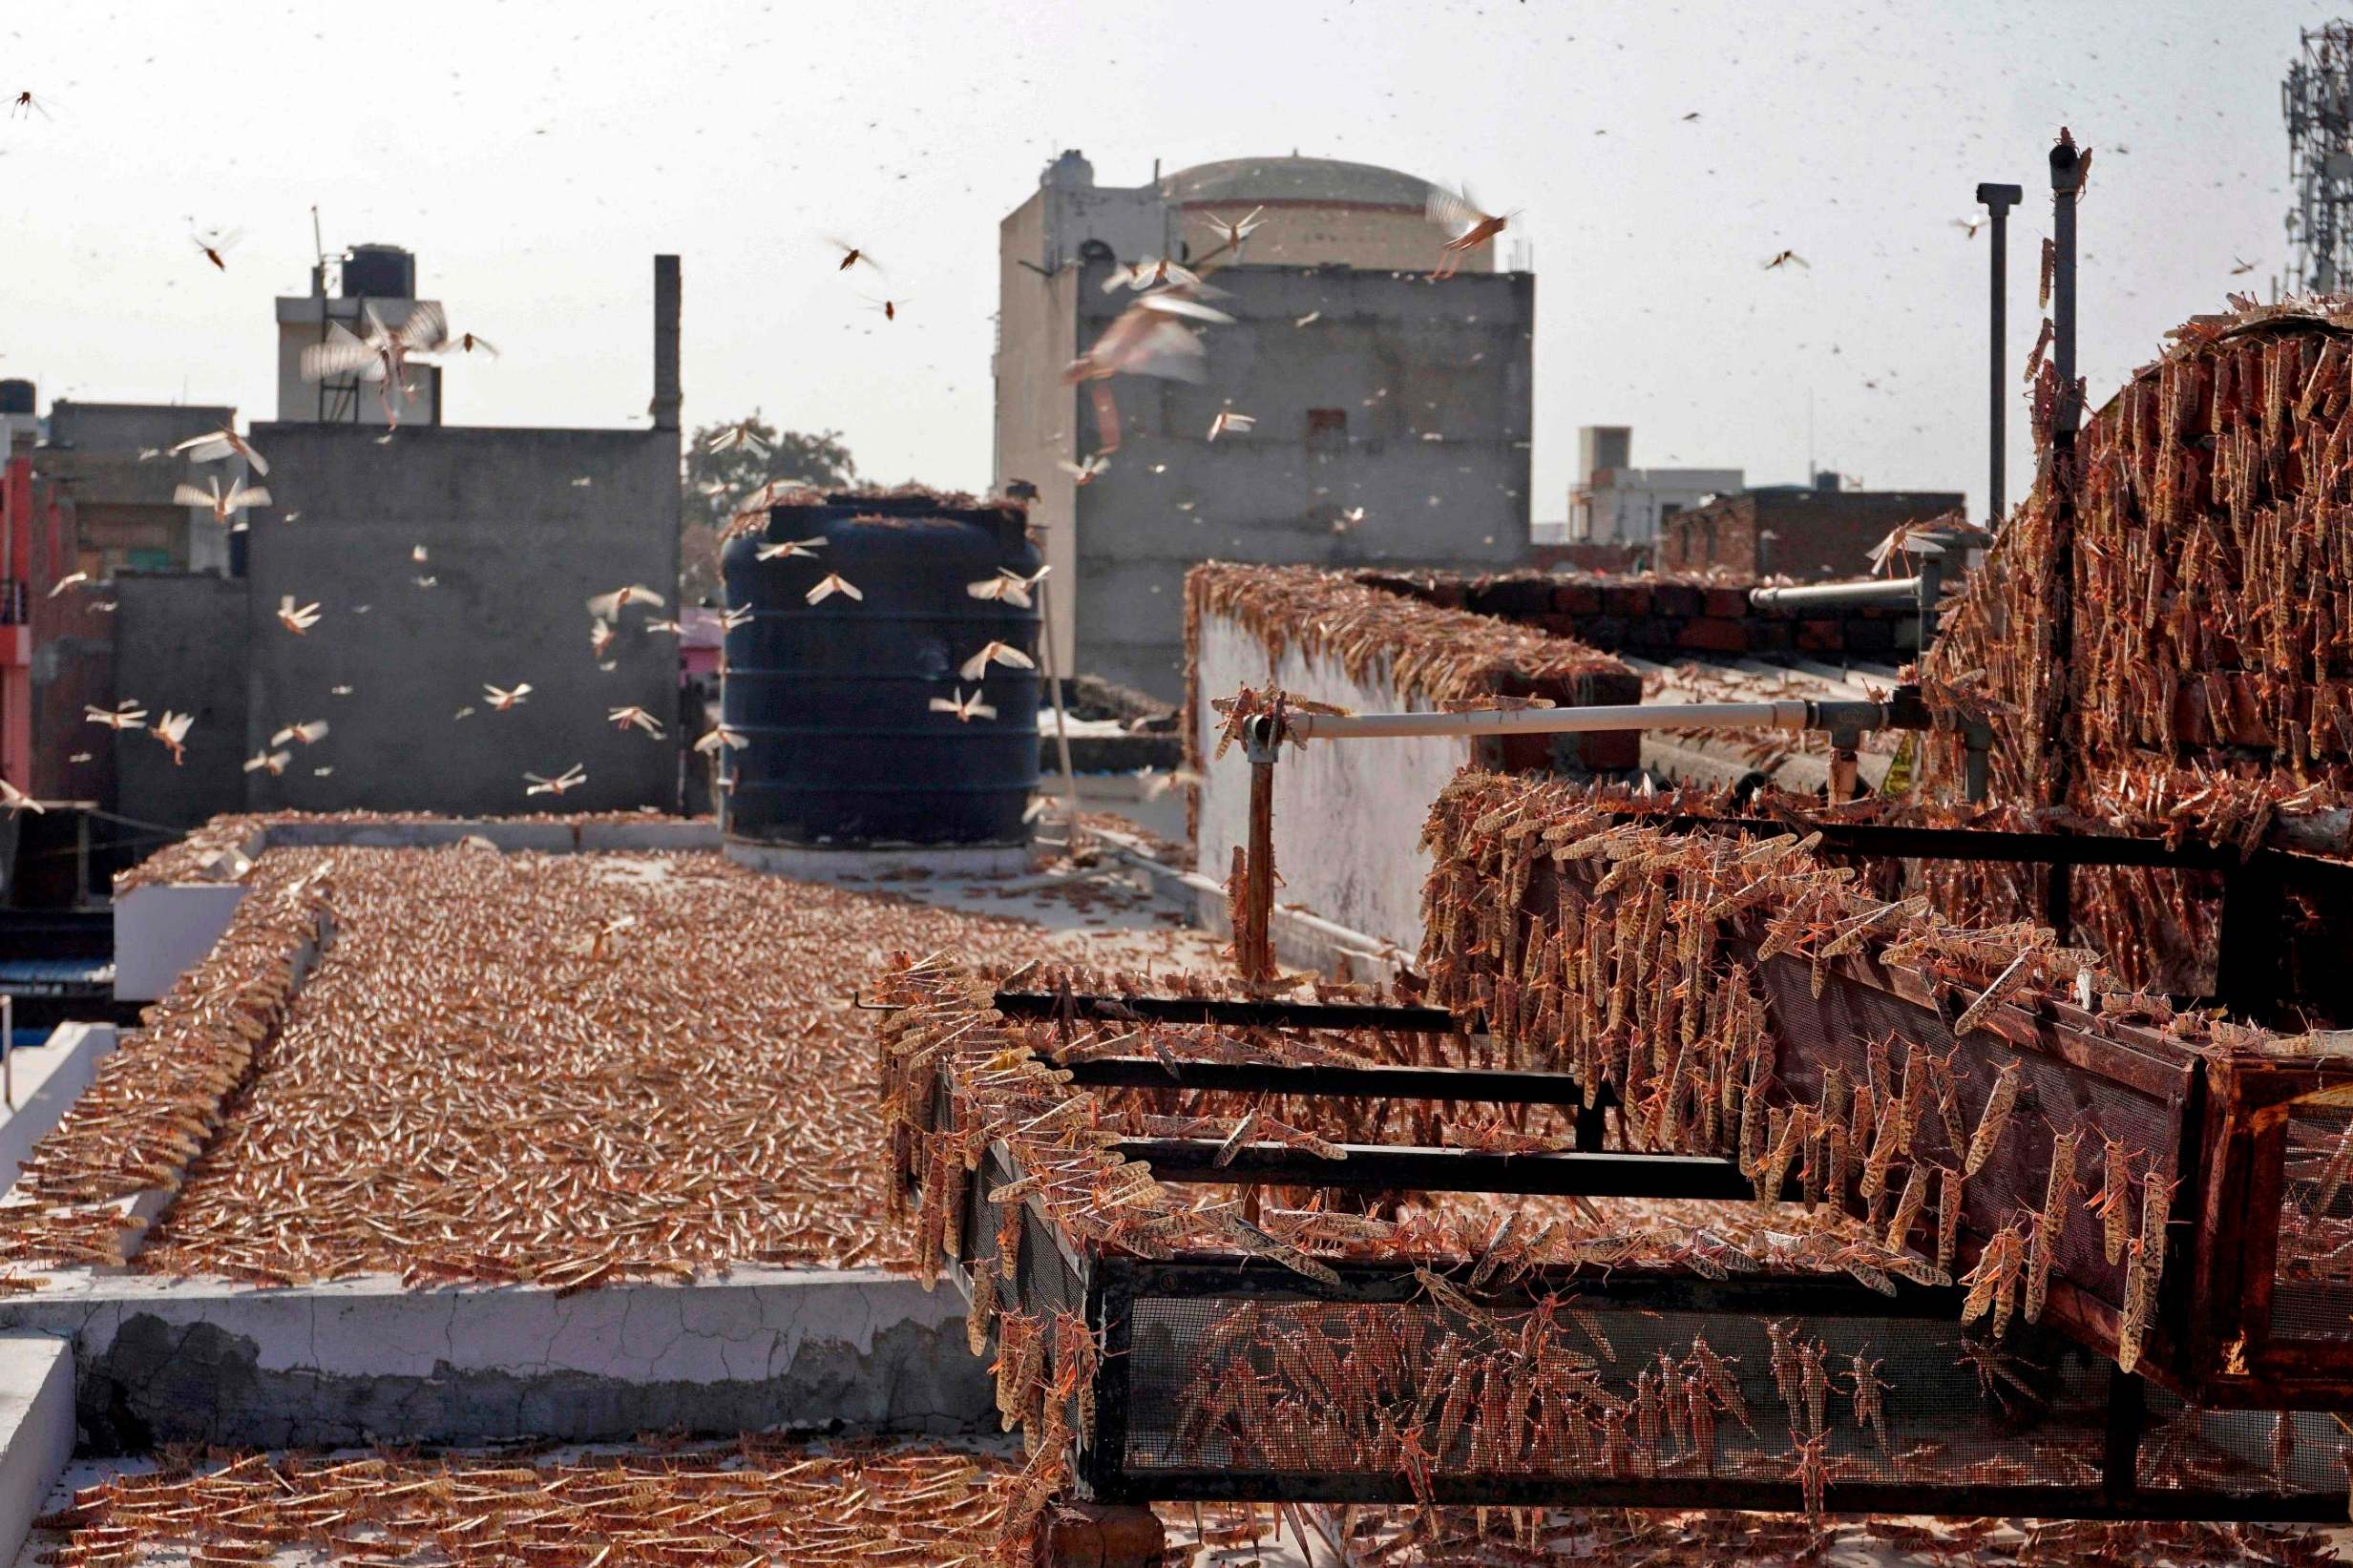 Locusts swarm on a residential building in Jaipur